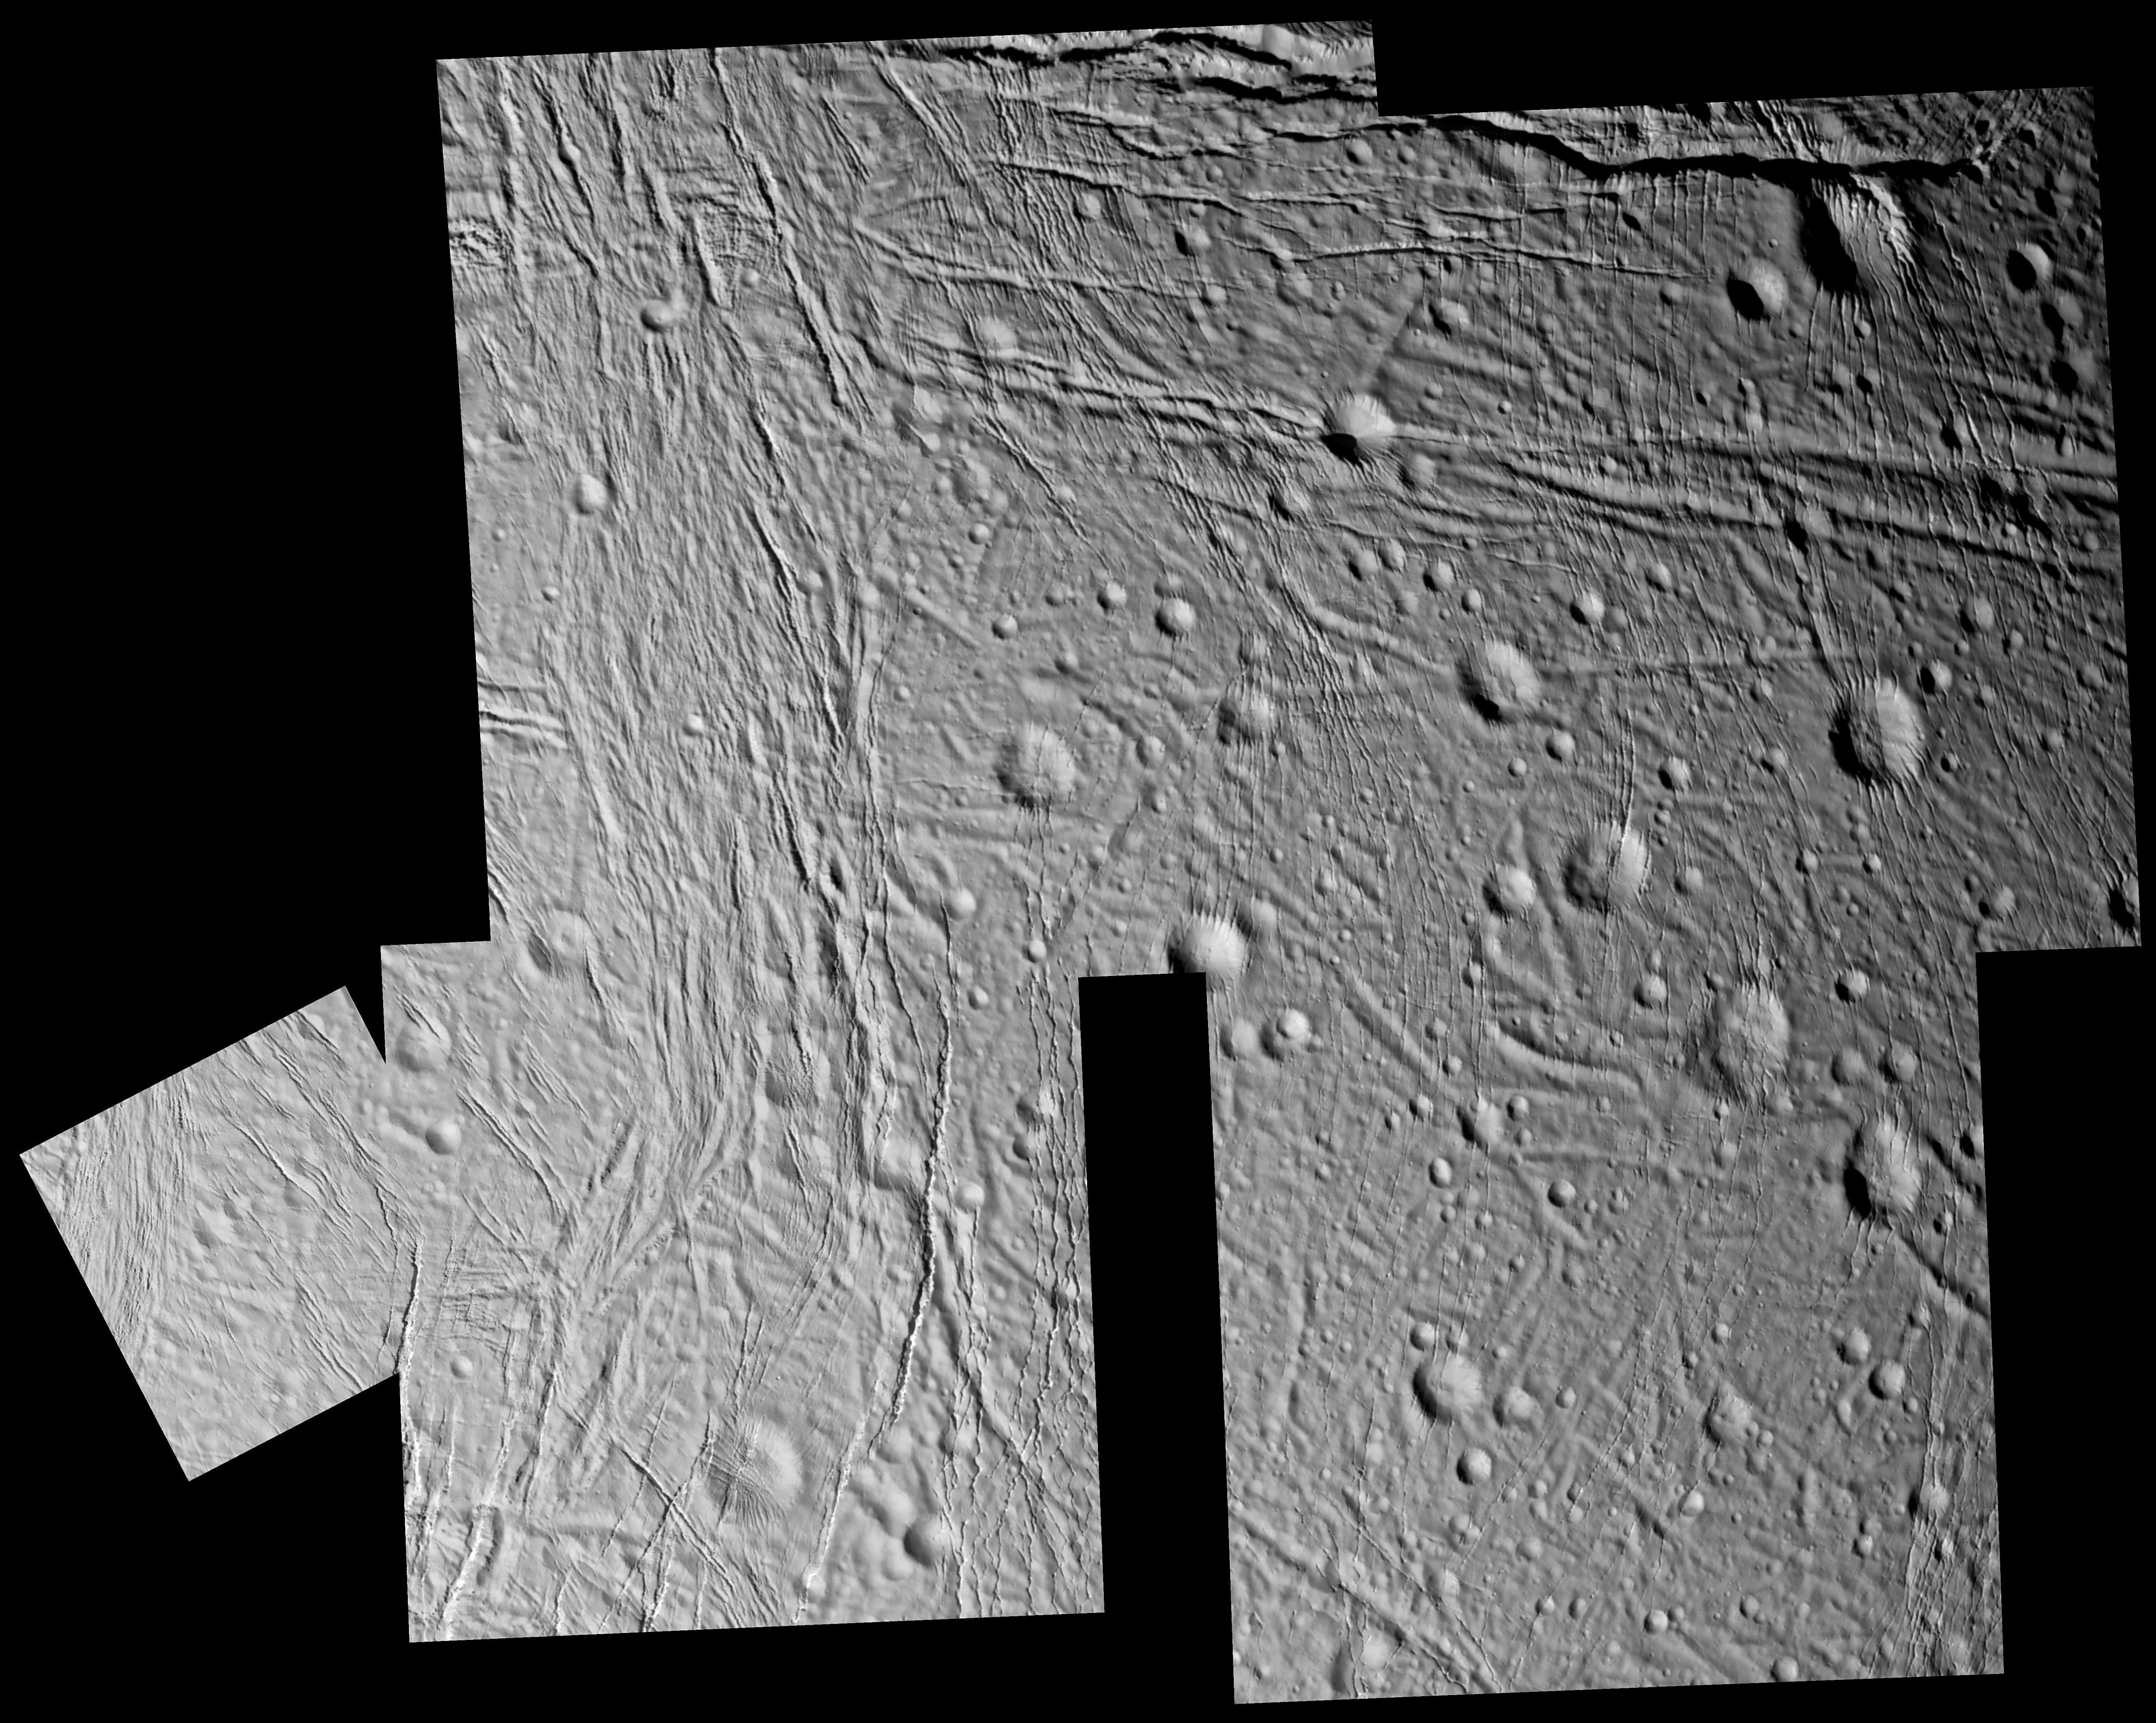 Fractures and impact craters on the surface of Enceladus